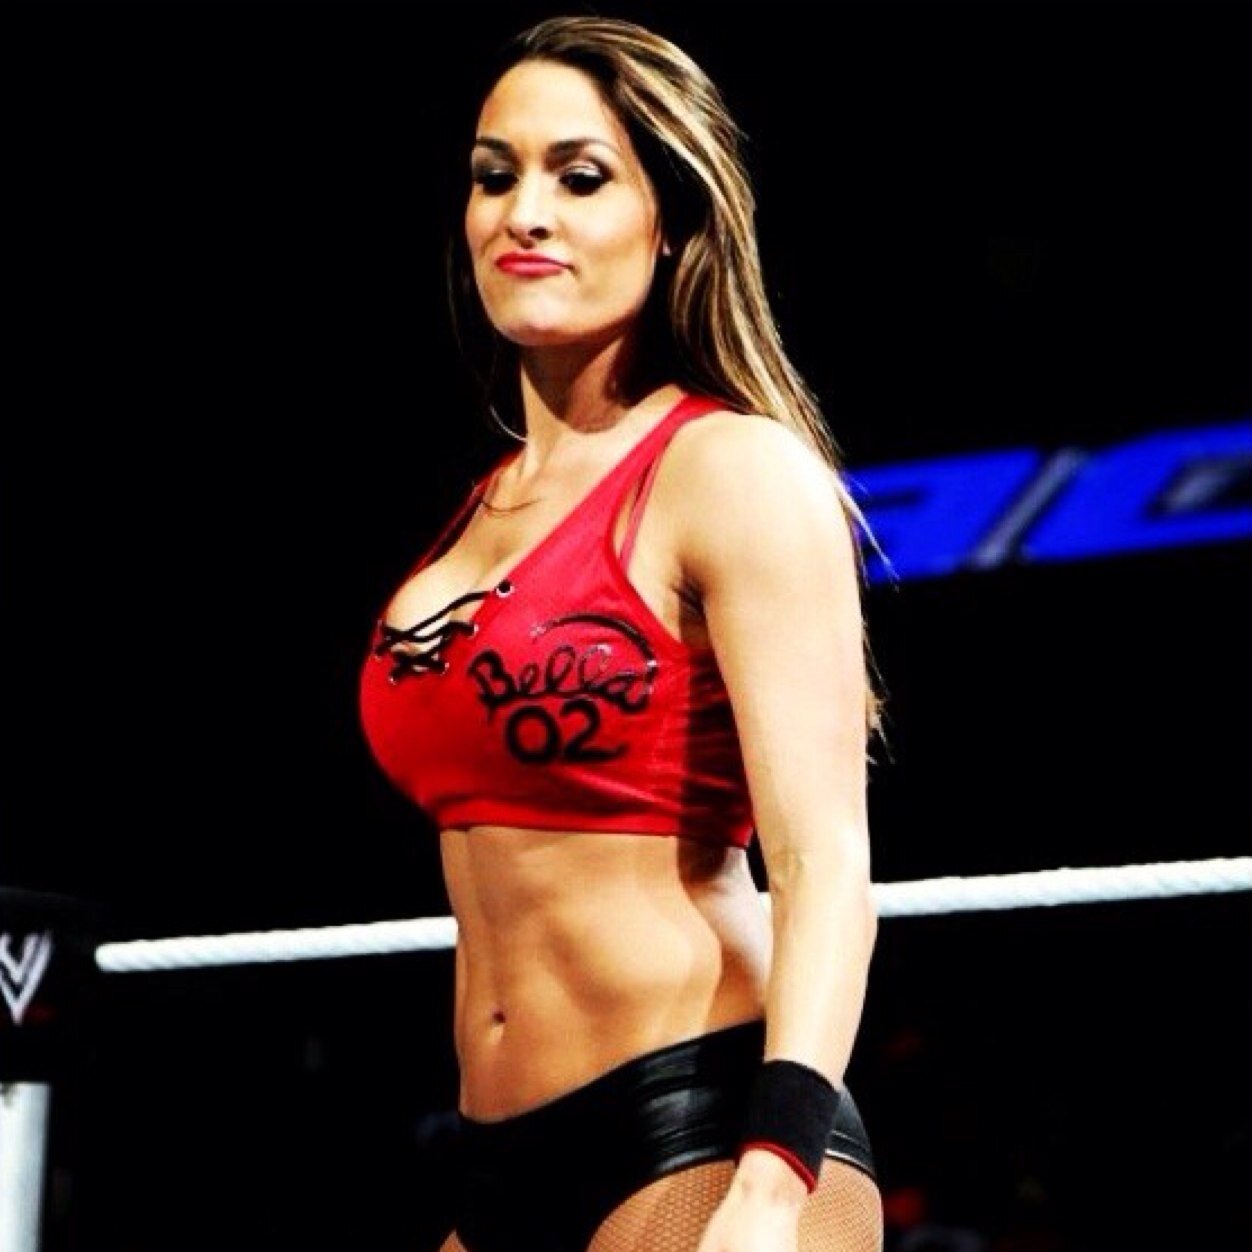 Nikki is my idol want to be just like her when i get older hope she will follow one day 
     ❤️john cena❤️.   ❤️shemus❤️. ❤️big show❤️.  ❤️brie❤️